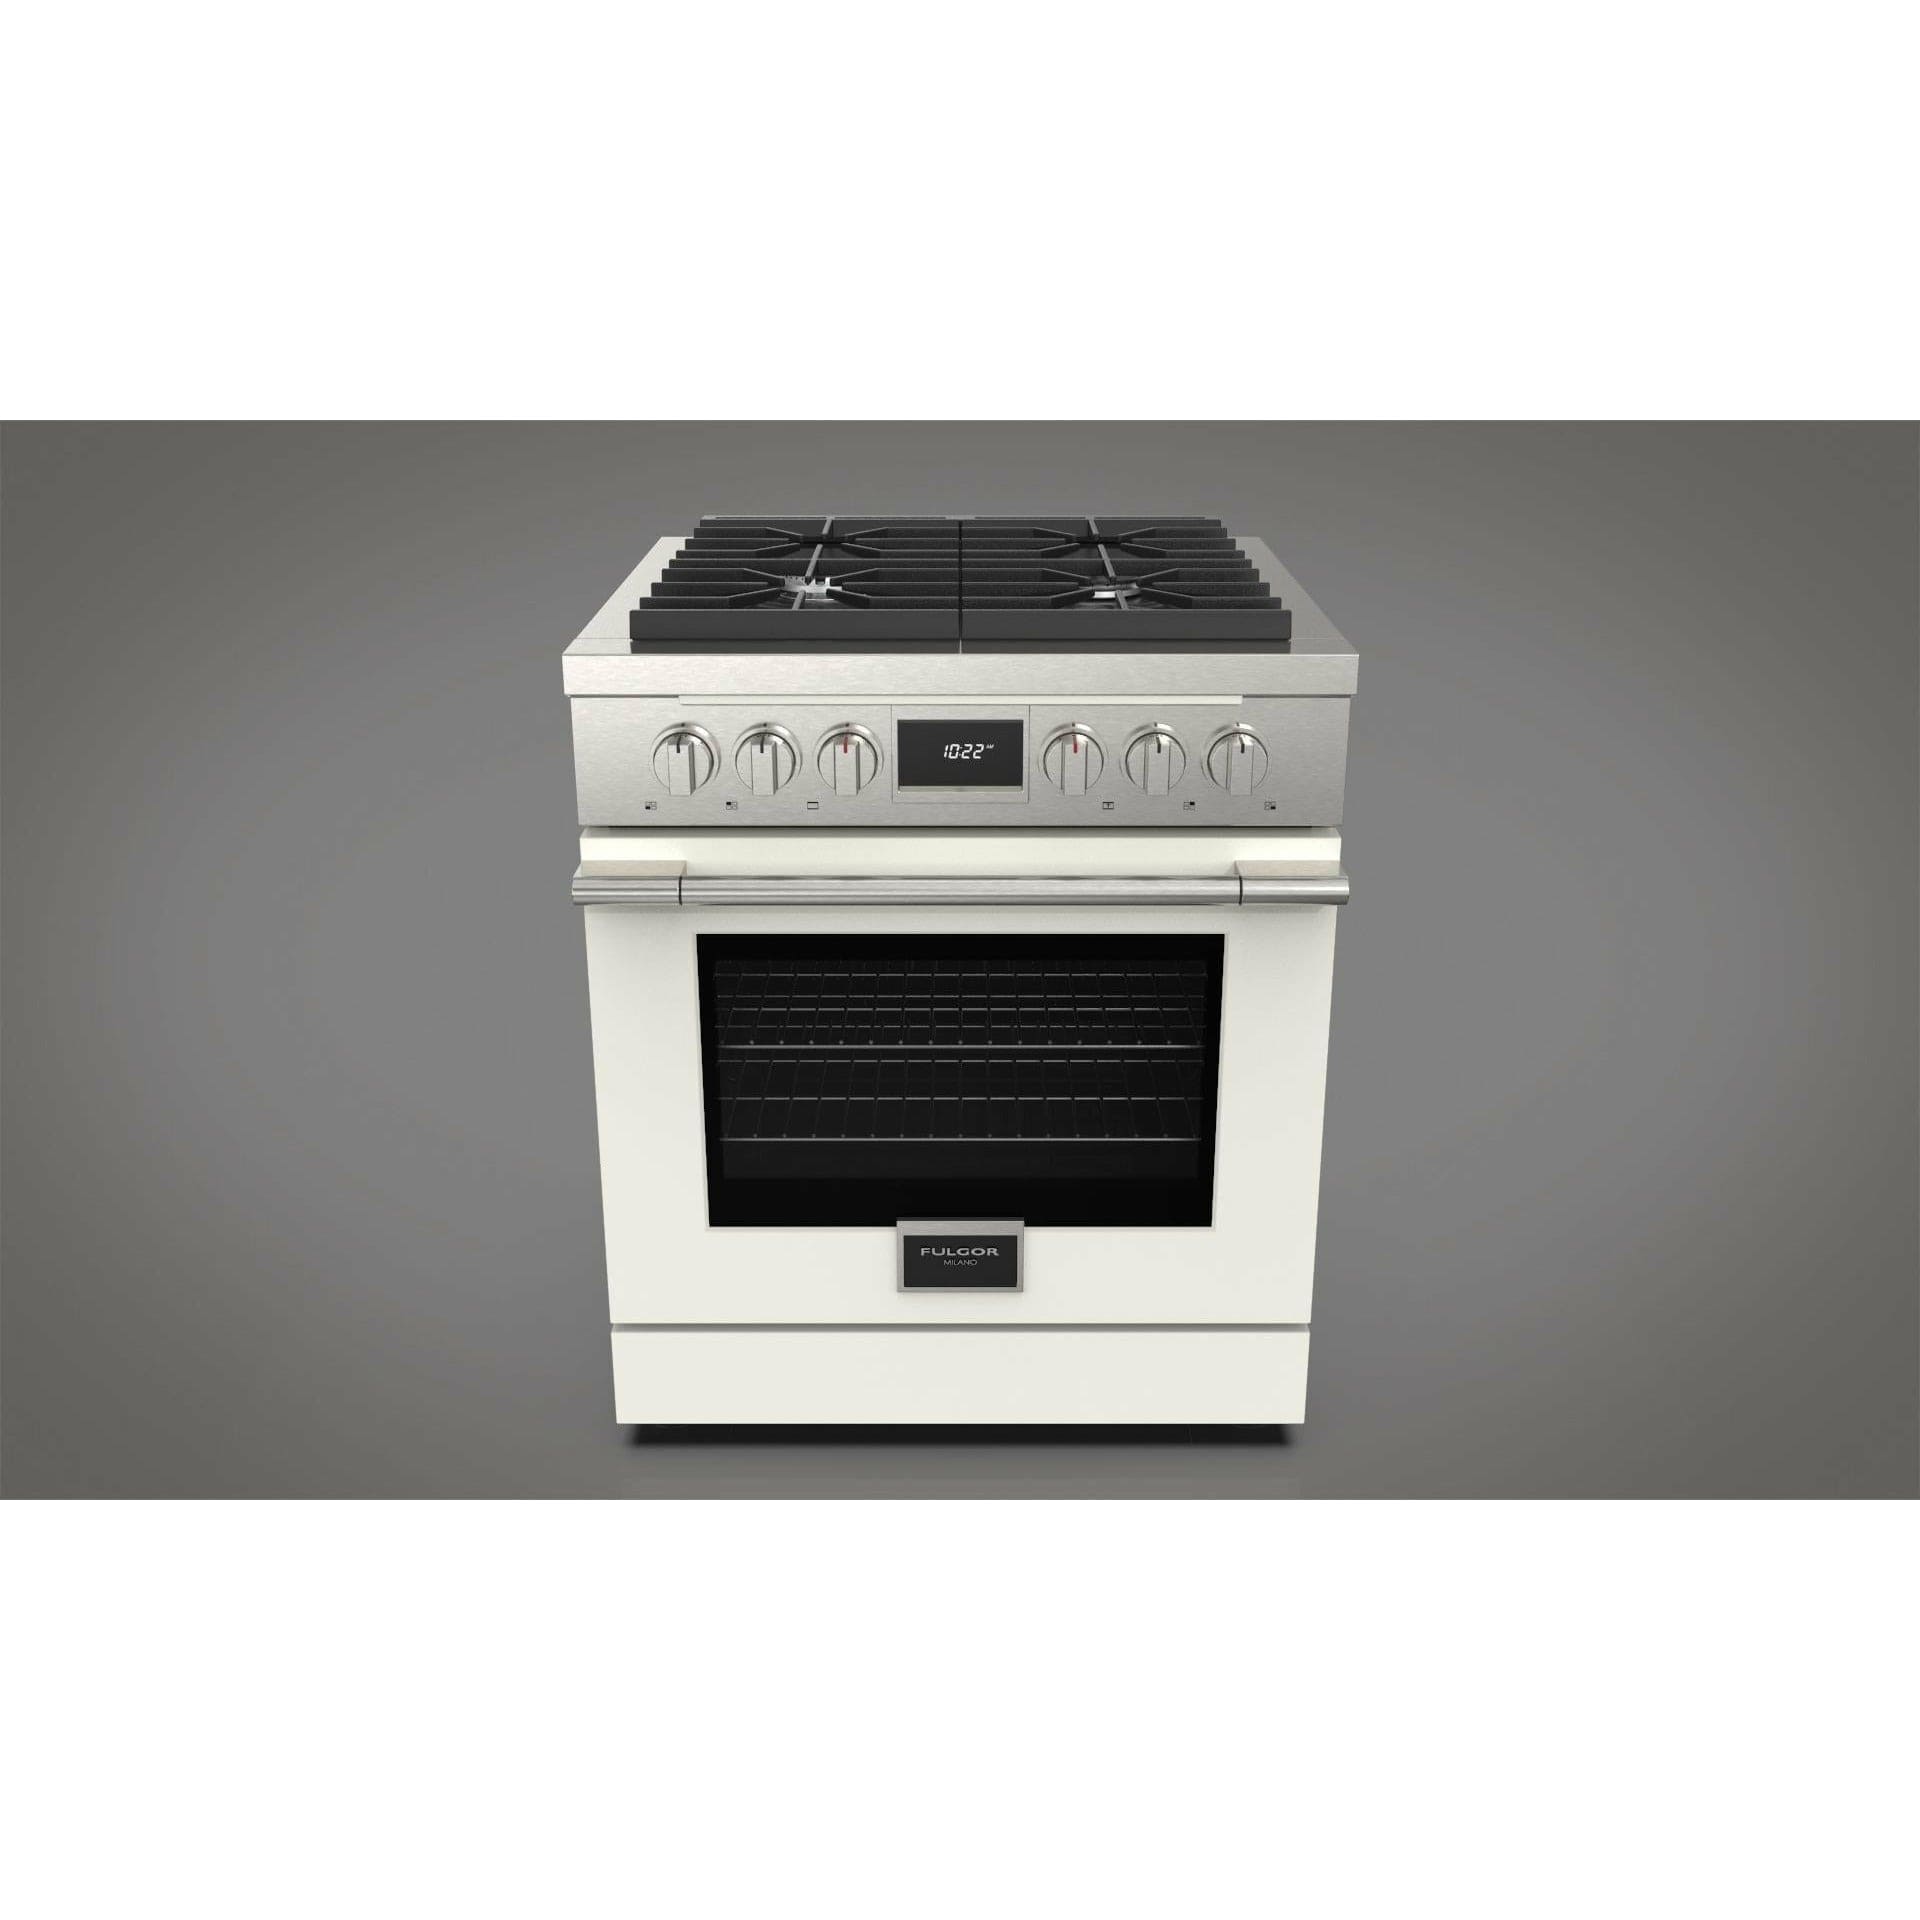 Fulgor Milano 30" Pro-Style Dual Fuel Range with 4 Sealed Burners,  4.4 Cu. Ft. Capacity w/  Stainless Steel - F4PDF304S1 Ranges ACDKIT30MW Luxury Appliances Direct